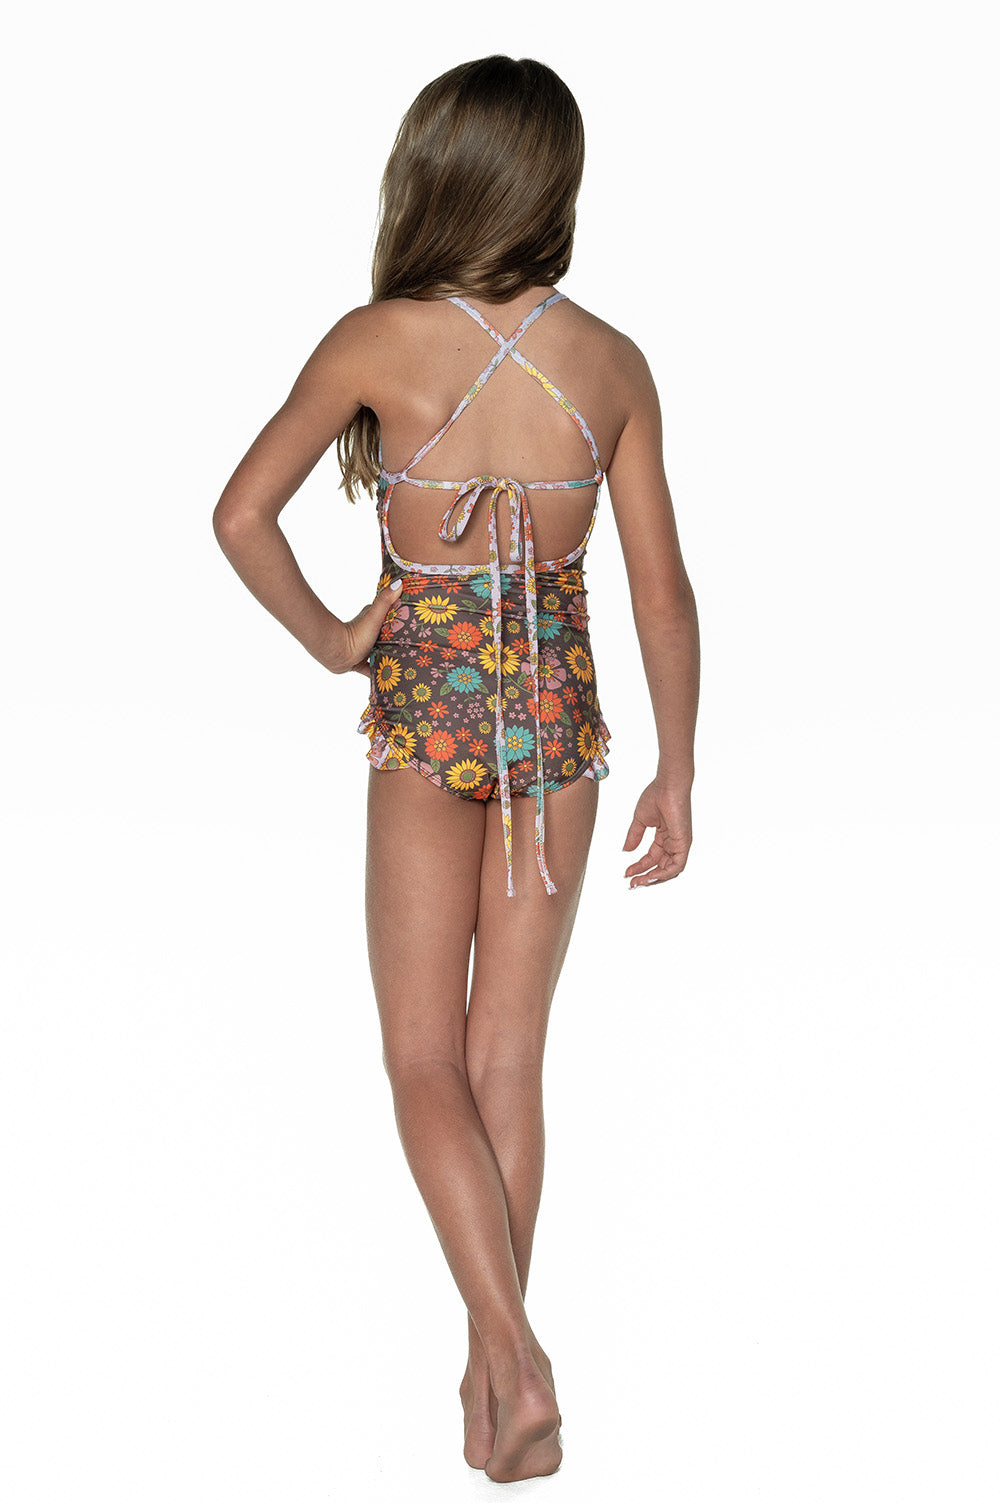 Girls One Piece Cross Back Swimsuit - Brown Floral - Poppy - Back